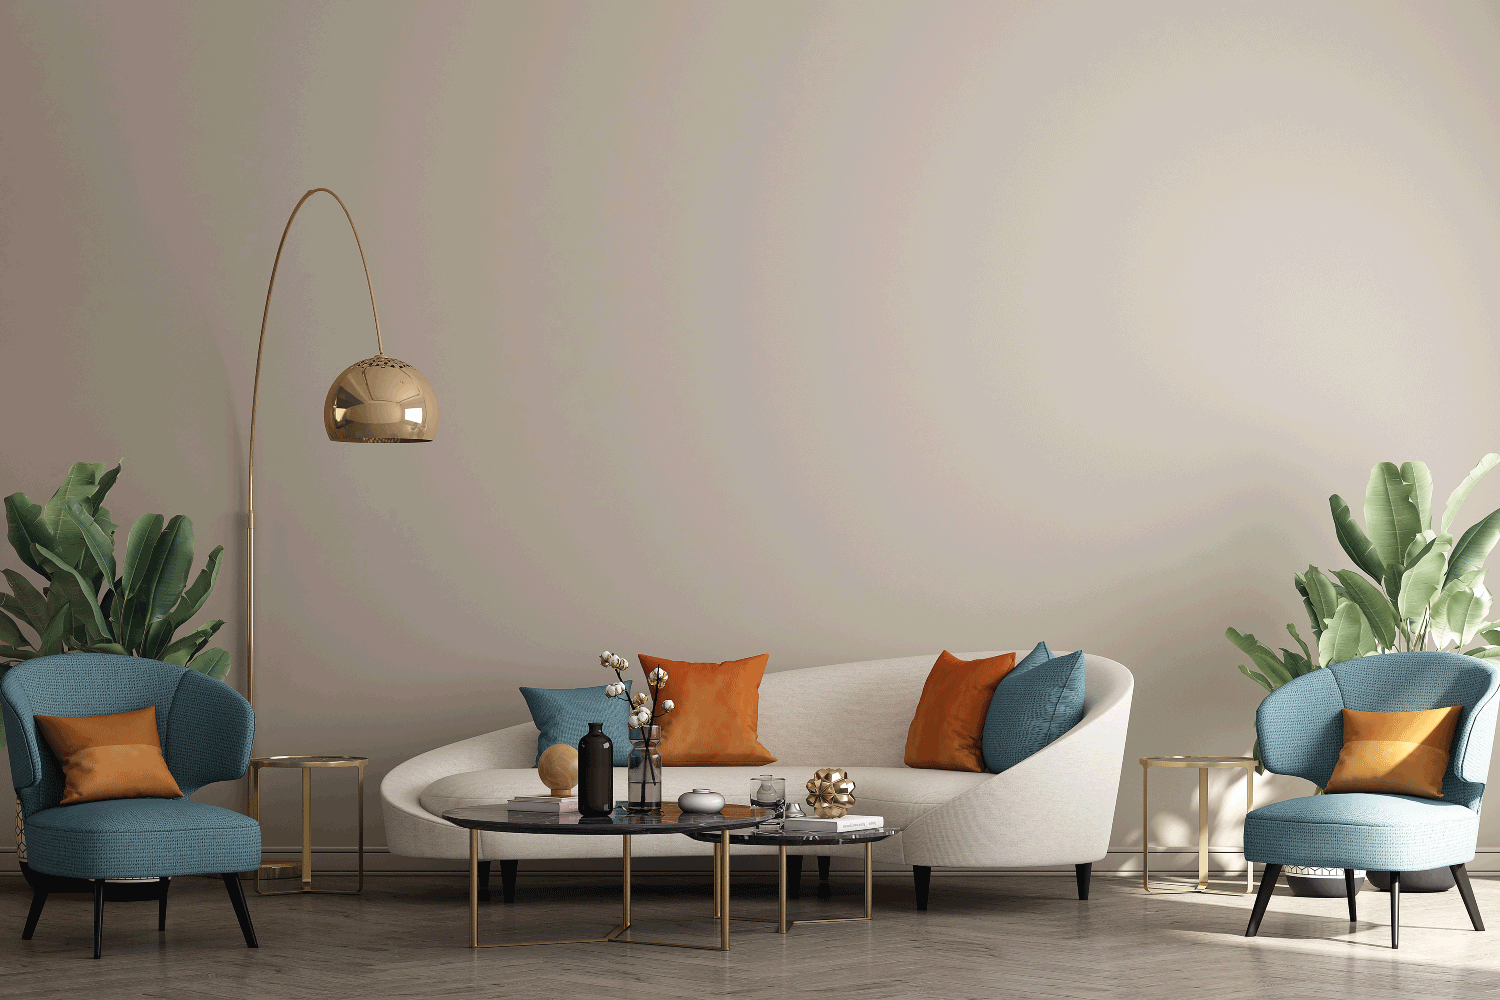 Modern Boho living room interior style. Empty wall. robin's egg blue color accents